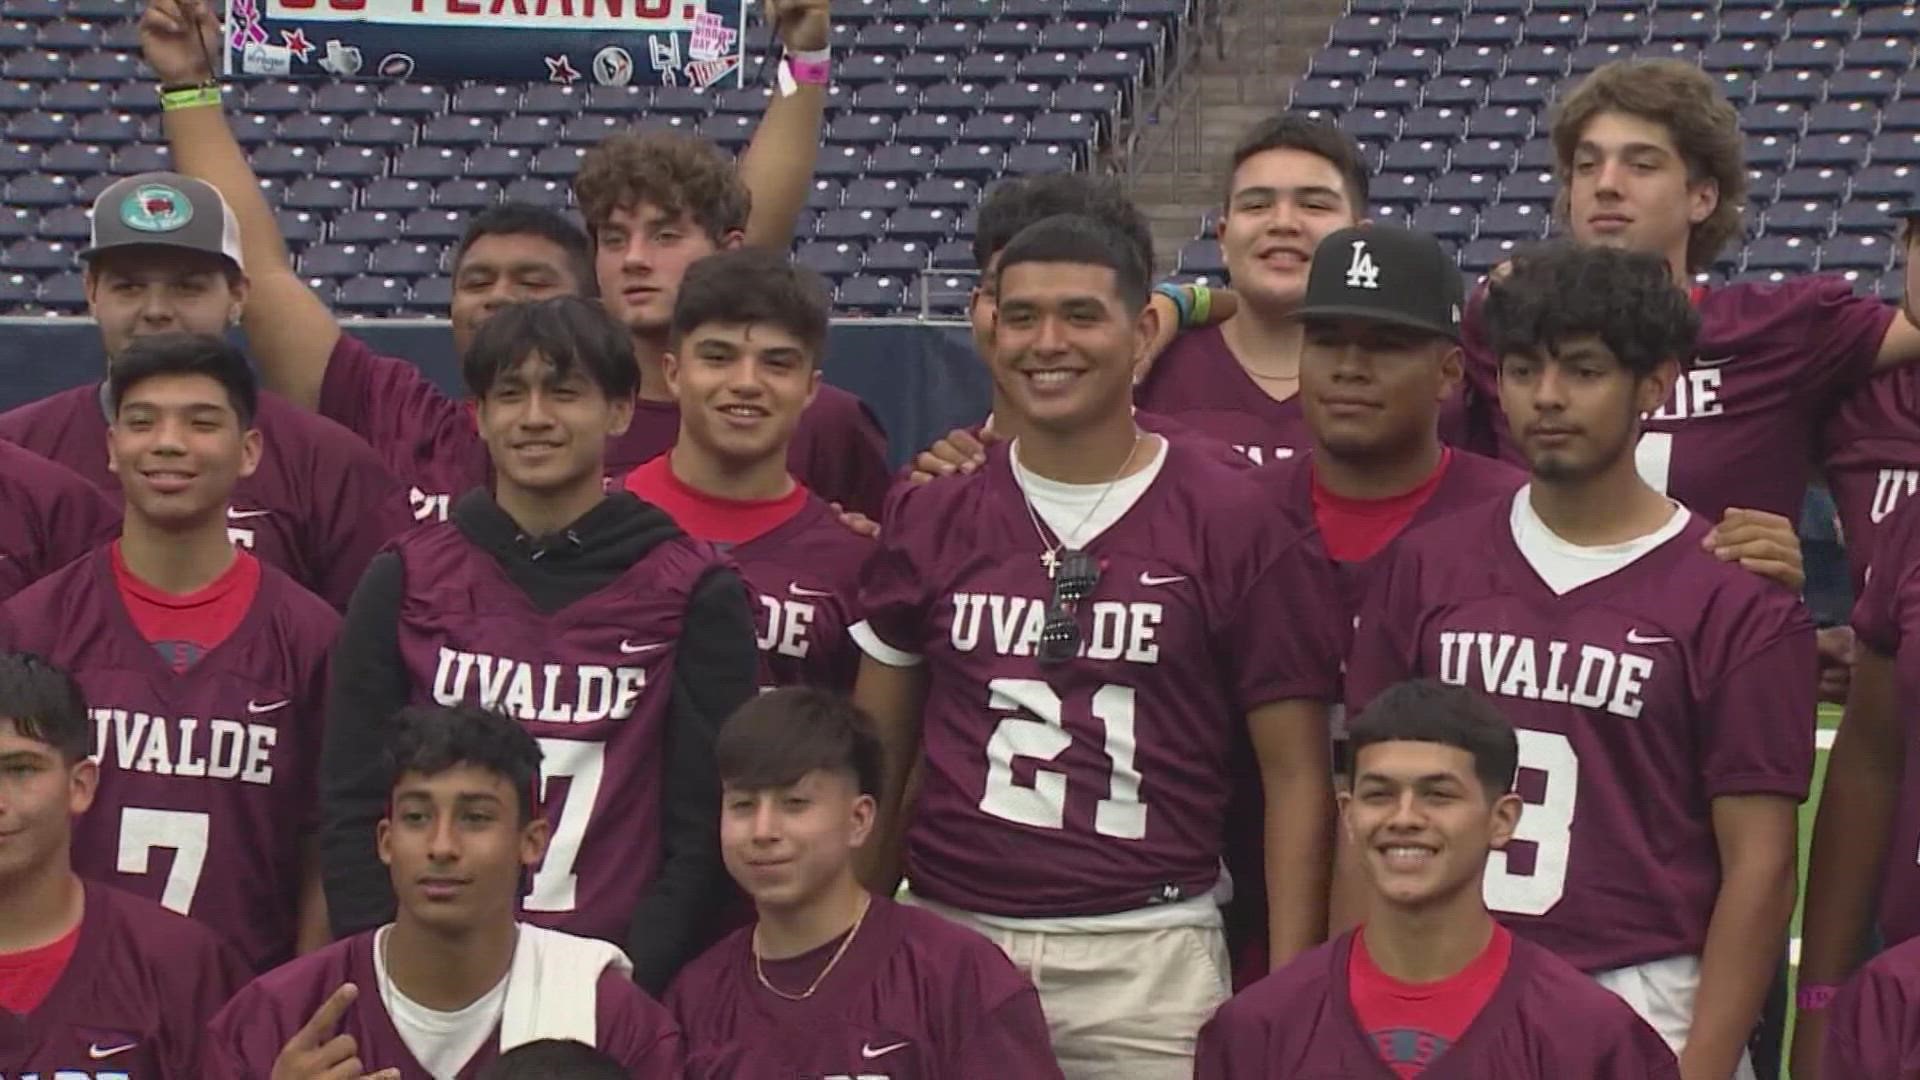 "Win or lose, we're helping people look at our town in a better light," Uvalde HS head football coach Wade Miller said.